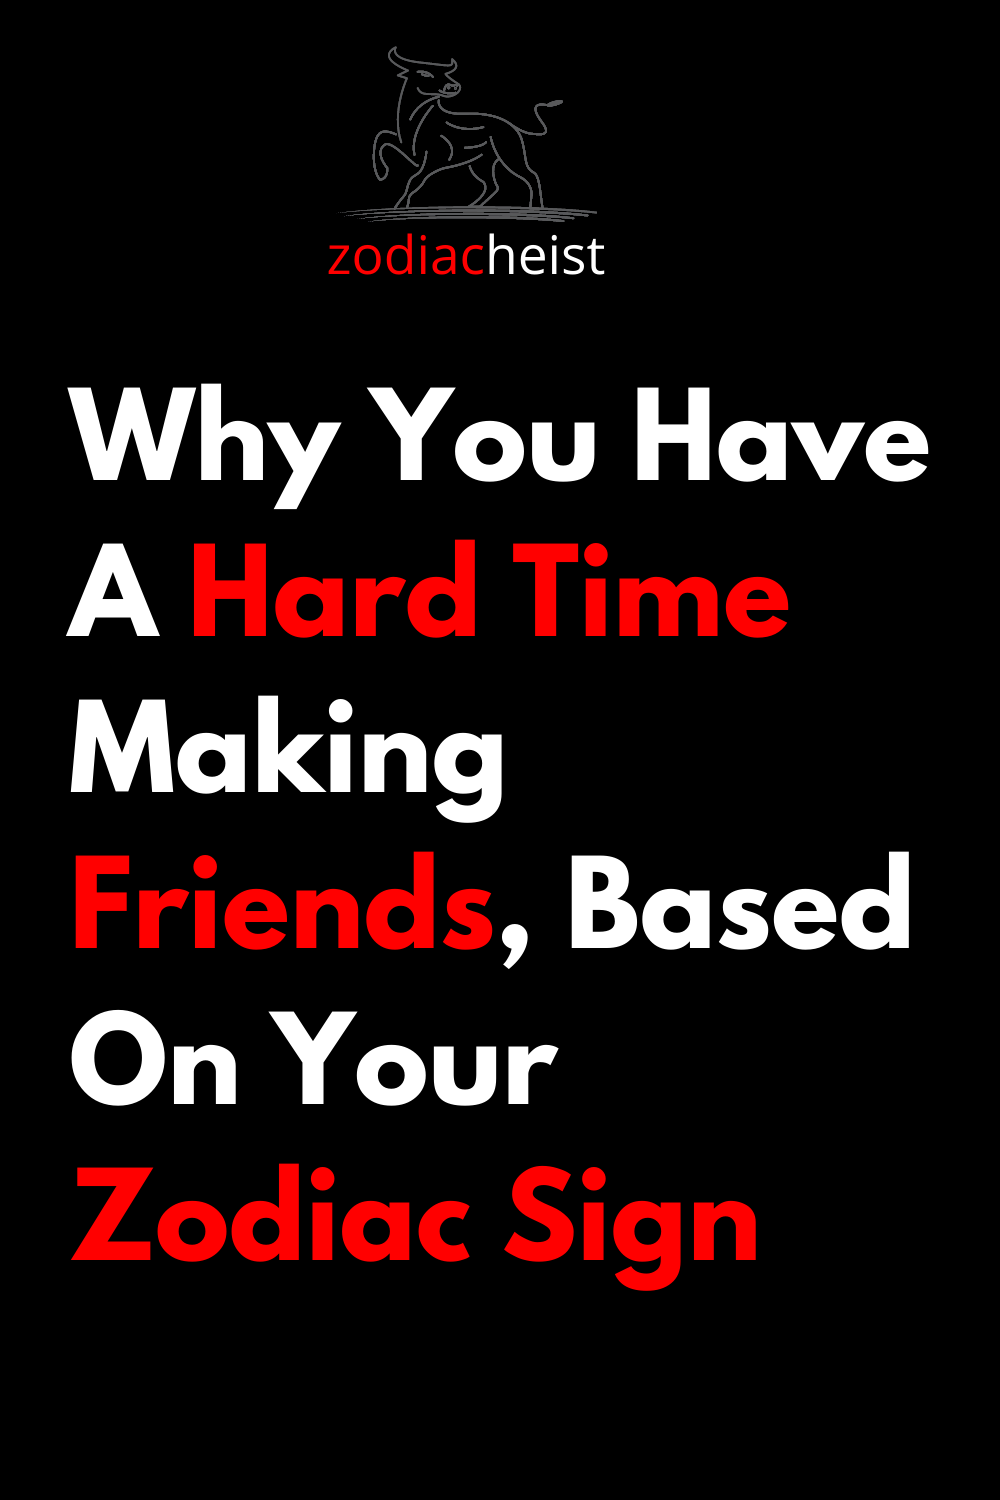 Why You Have A Hard Time Making Friends, Based On Your Zodiac Sign